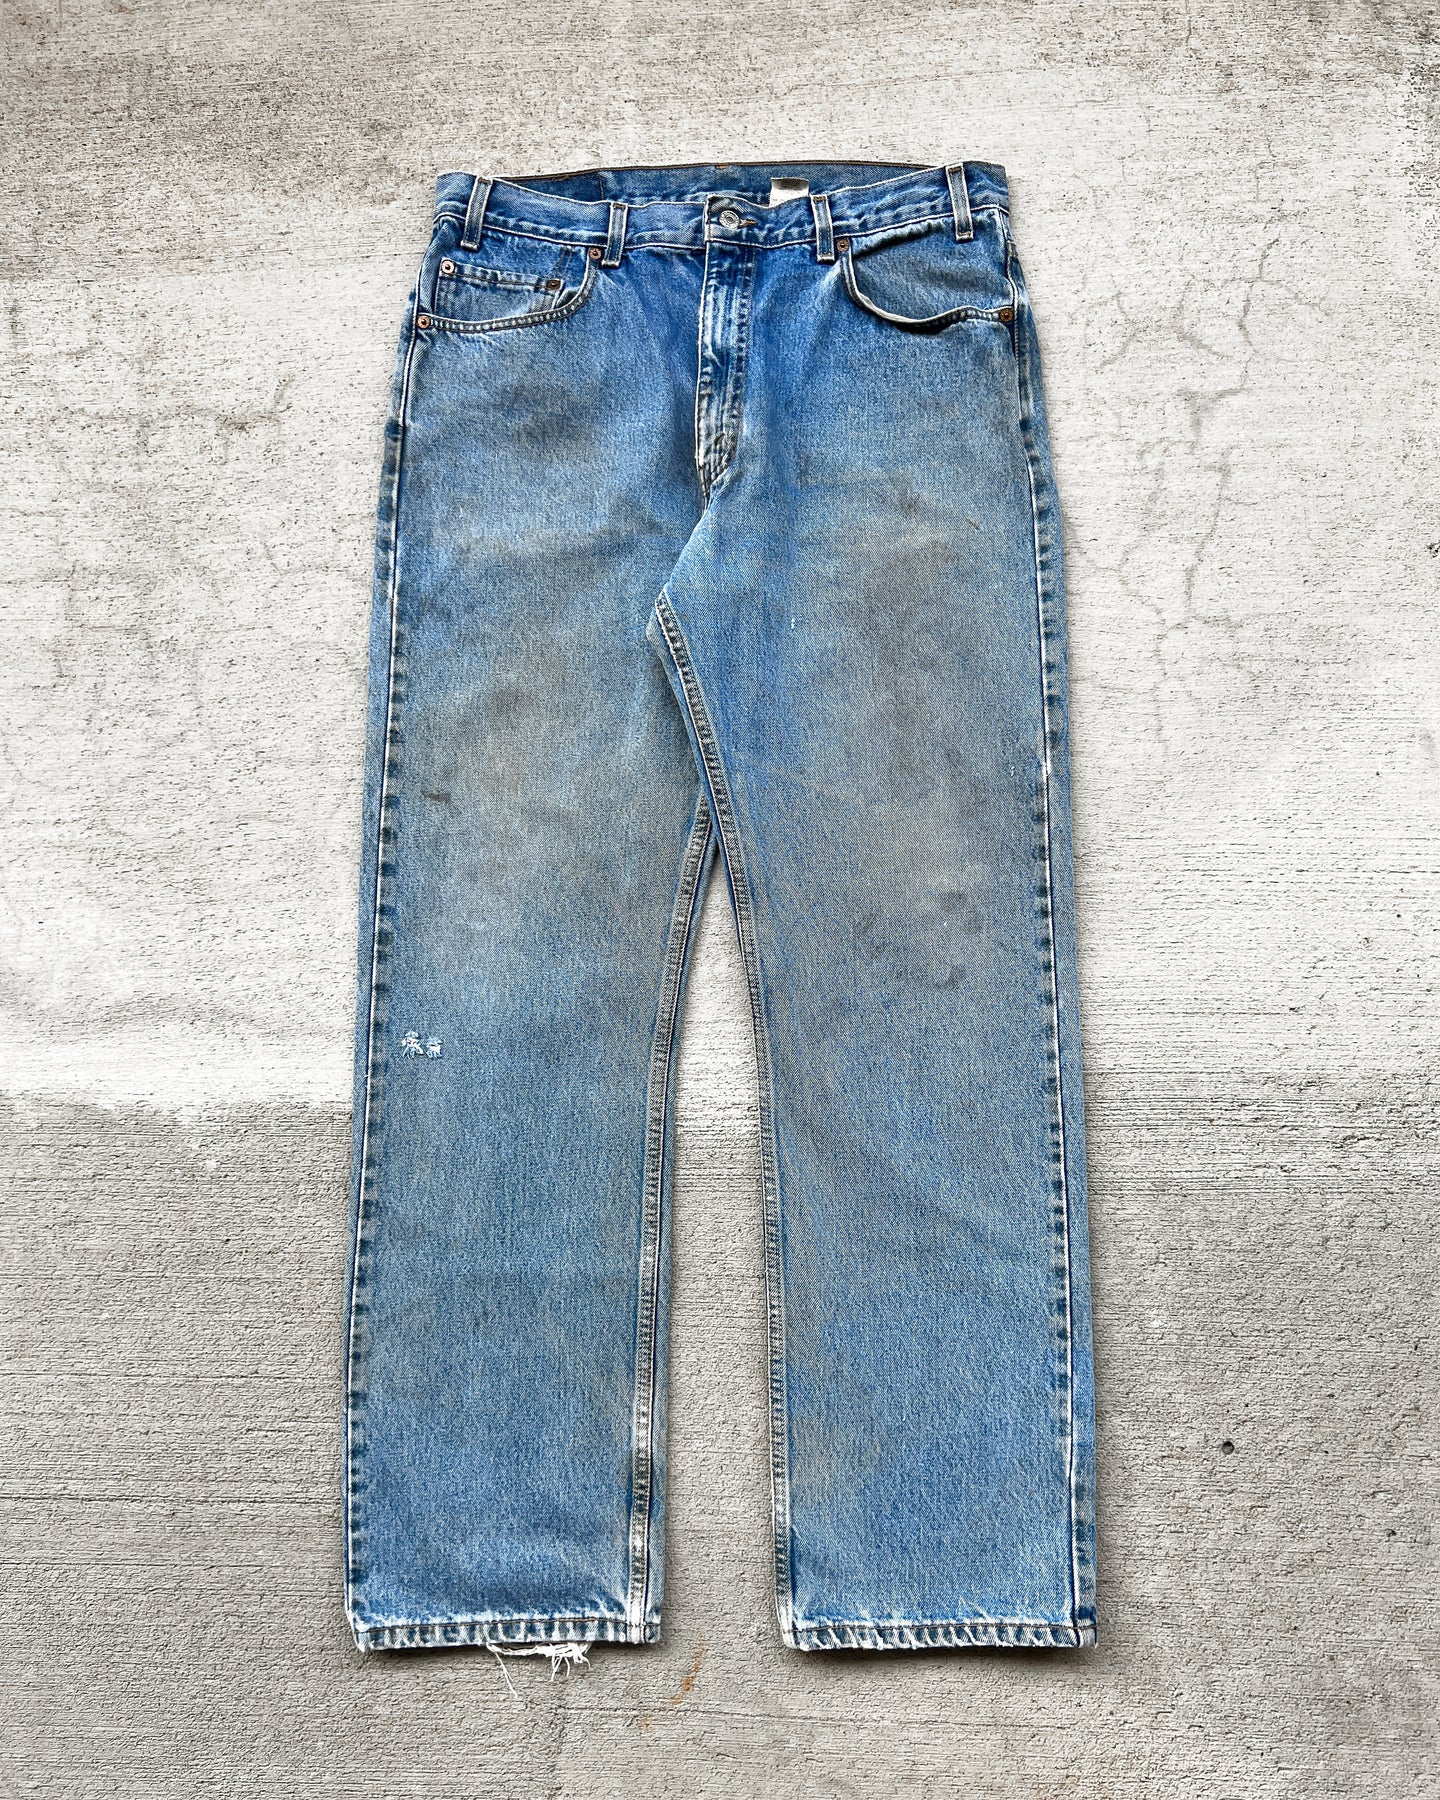 1990s Levi's Dirty Wash 505 - Size 35 x 32